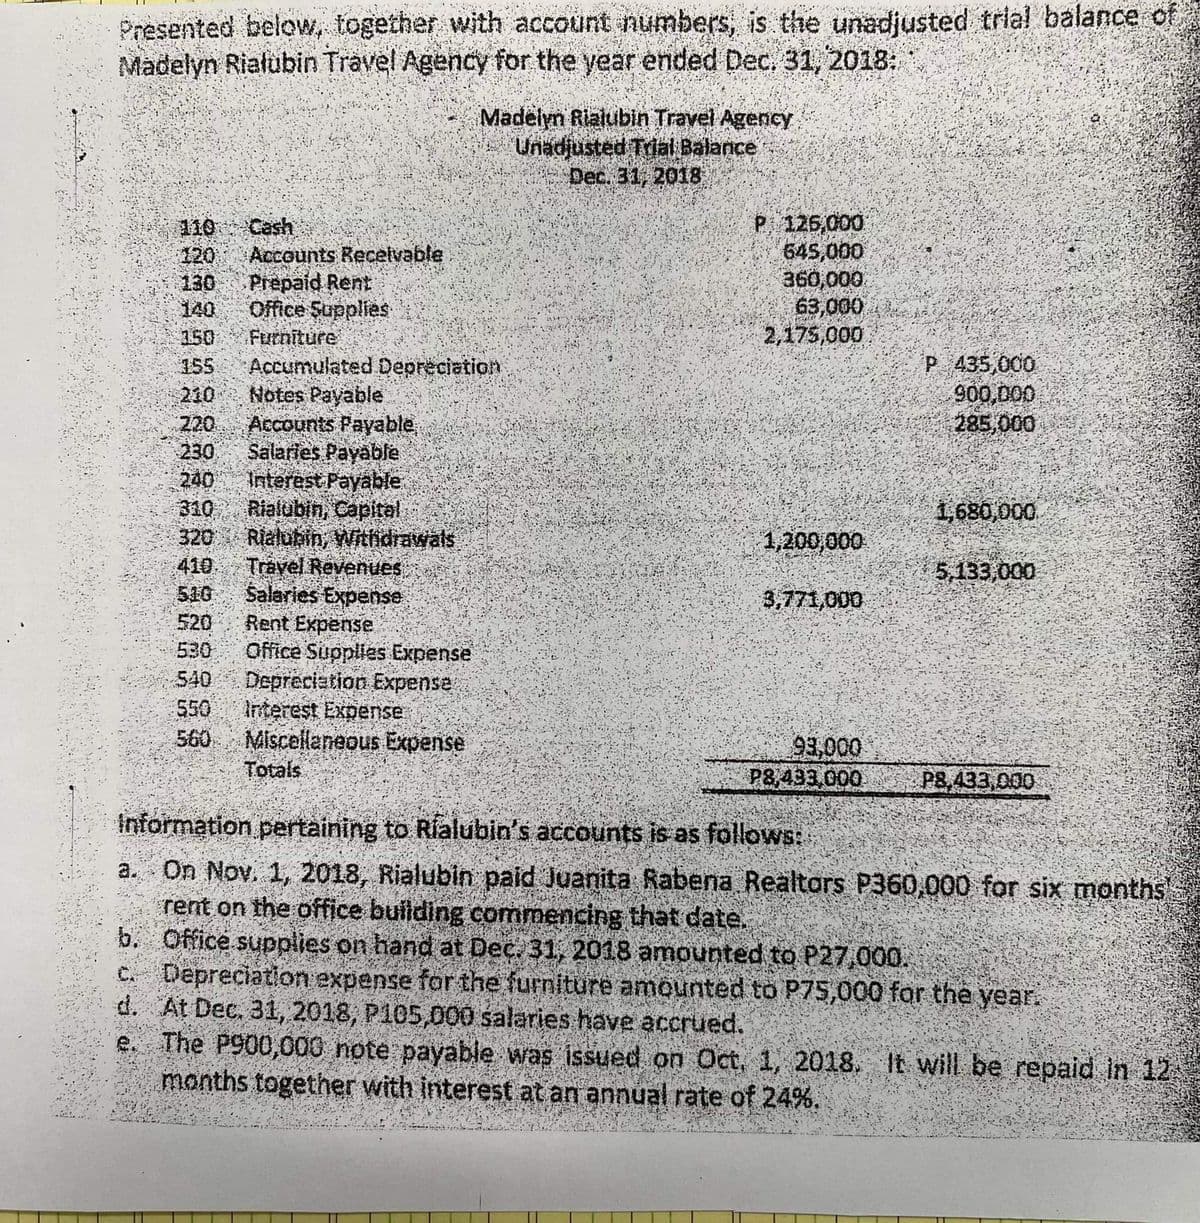 Presented below, together with account numbers, is the unadjusted trial balance of
Madelyn Rialubin Travel Agency for the year ended Dec. 31, 2018:.
Madelyn Rialubin Travel Agency
Unadiusted Trial Balance
Dec. 31, 2018
Cash
110
Accounts Recelvable
120
130
Prepaid Rent
140
Office Supplies
Furniture
150
P 125,000
645,000
360,000
63,000
2,175,000
P 435,000
900,000
285,000
155
Accumulated Depreciation
210
Notes Payable
220
Accounts Payable,
230
Salaries Payable
Interest Payable
Rialubin, Capital
Rialubin, Witfidrawals
Travel Revenues.
Salaries Expense
Rent Expense
Office Supplles Expense
240
310
320
1,680,000.
1,200,000
410
5,133,000
510
3,771,000
520
530
540
Depreciation Expense
550
Interest Expense
560 Miscellaneous Expense
93,000
P8,433.000
Totals
P8,433,000
Information pertaining to Rialubin's accounts is as follows:
a. On Nov. 1, 2018, Rialubin paid Juanita Rabena Realtors P360,000 for six months'
rent on the office buiiding commencing that date.
b. Office supplies on hand at Dec. 31, 2018 amounted to P27,000.
C. Depreciation expense for the furniture amounted to P75,000 for the year.
d. At Dec. 31, 2018, P105,000 salaries have accrued.
e. The P900,000 note payable was issued on Oct. 1, 2018. It wilL be repaid in 12
months together with interest at an annual rate of 24%.
